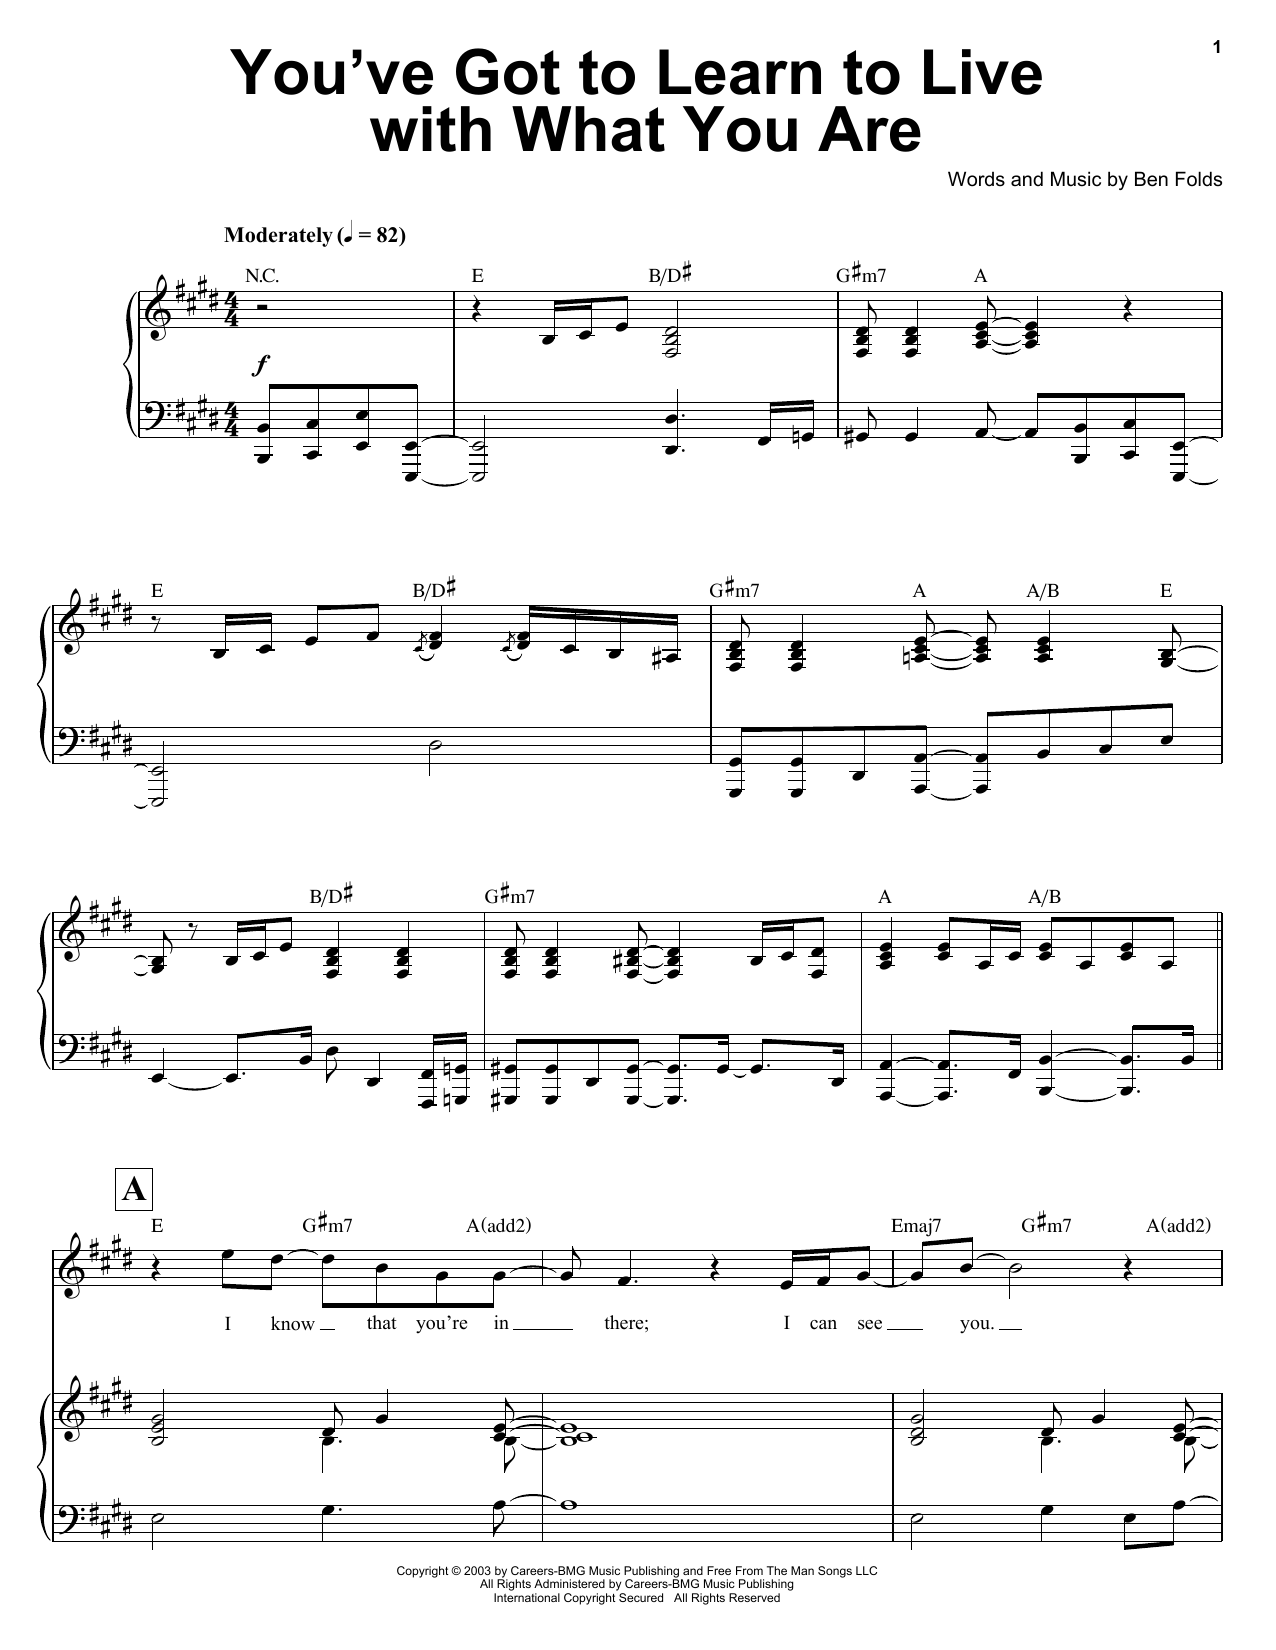 Ben Folds You Ve Got To Learn To Live With What You Are Sheet Music Pdf Notes Chords Pop Score Keyboard Transcription Download Printable Sku